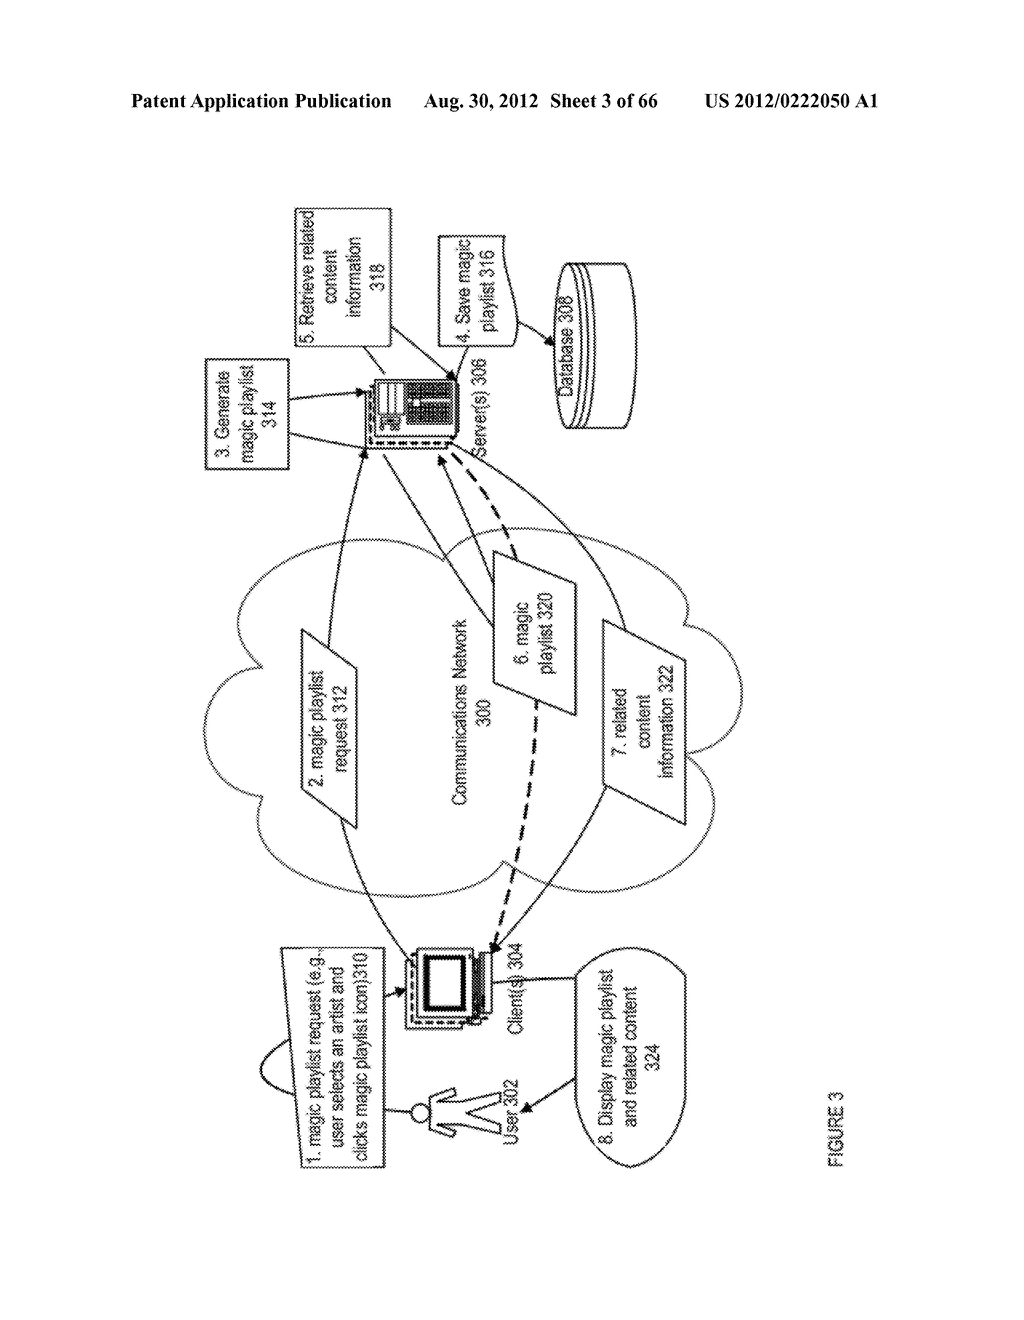 USAGE COLLECTION AND ANALYTICS PLATFORM APPARATUSES, METHODS AND SYSTEMS - diagram, schematic, and image 04